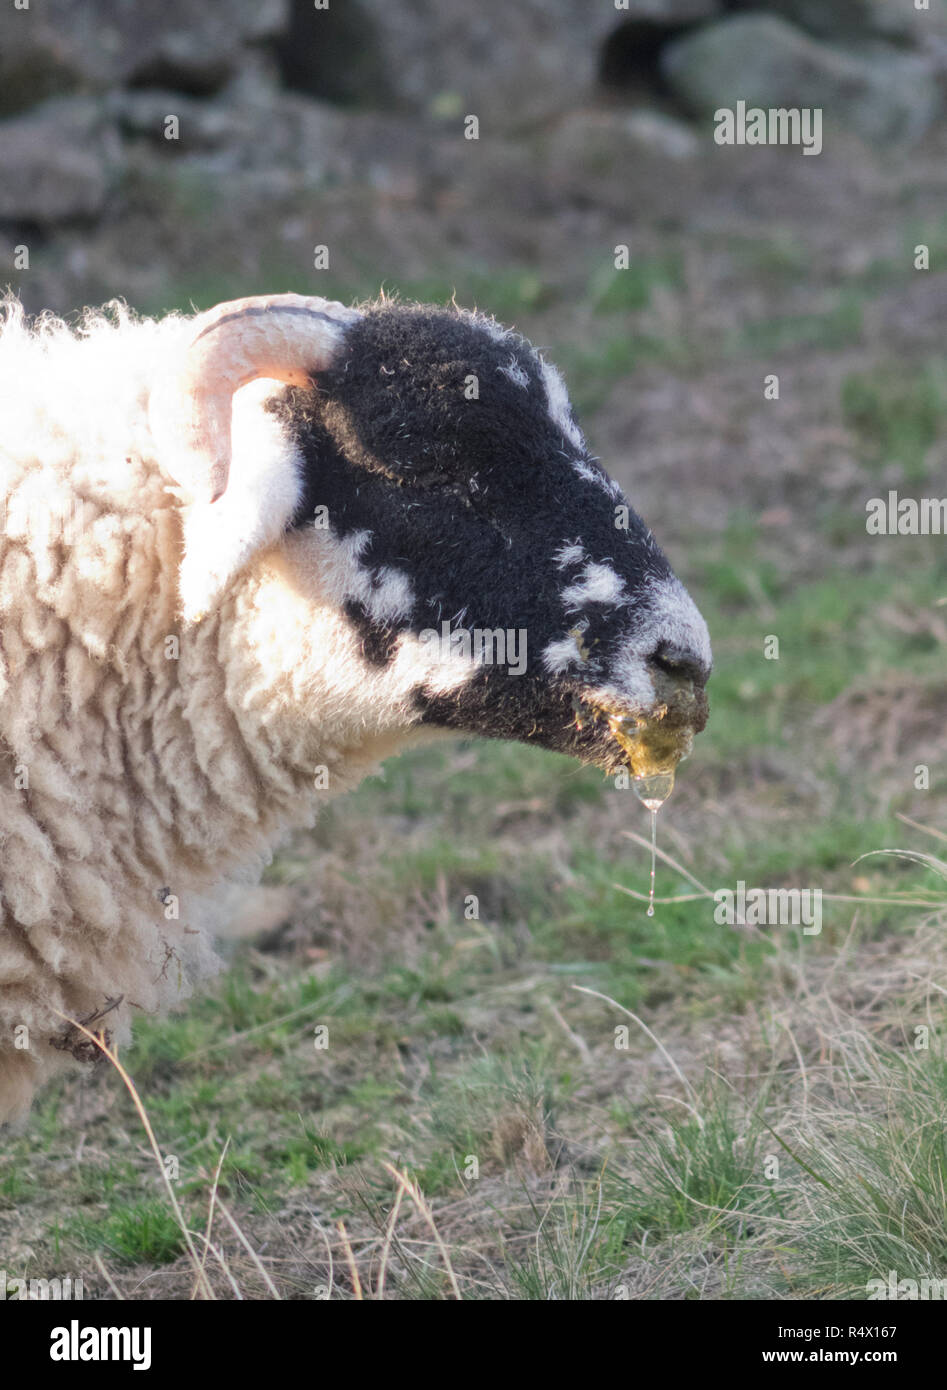 https://c8.alamy.com/comp/R4X167/nasal-bot-fly-causing-nasal-discharge-respiratory-problems-in-a-sheep-R4X167.jpg